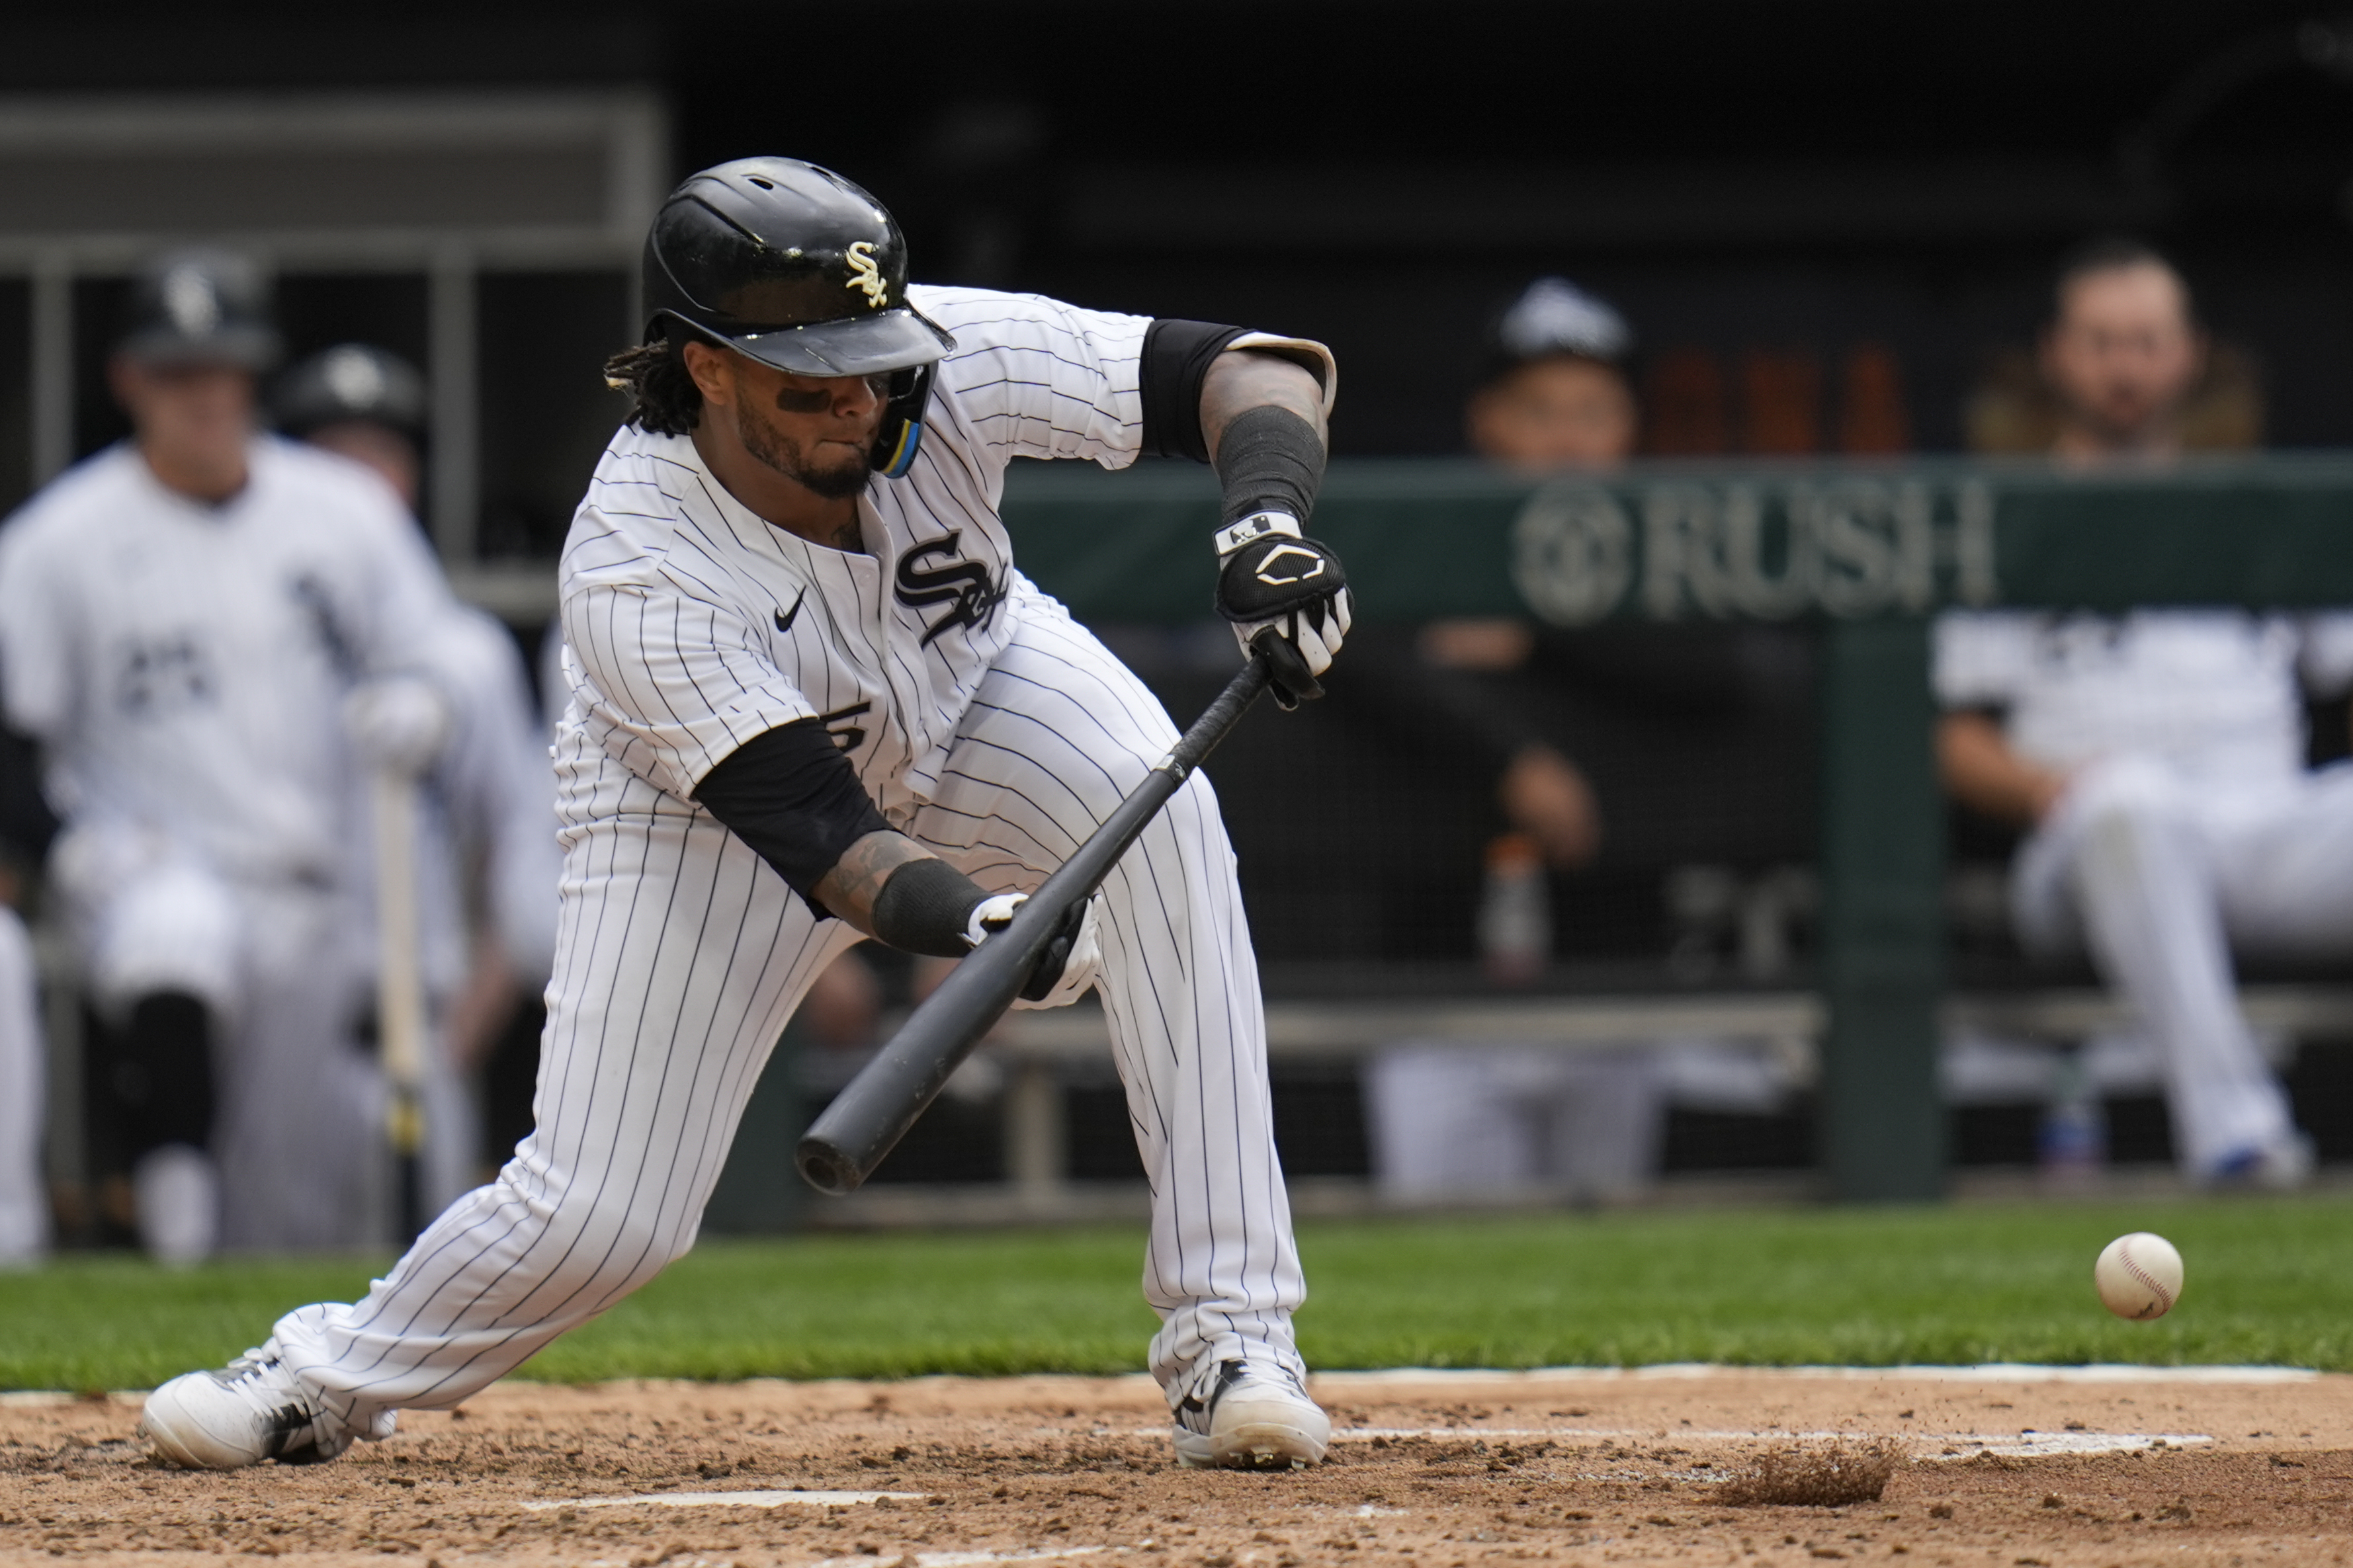 sheets and fedde lead white sox over royals 2-1 to stop 6-game skid with doubleheader split